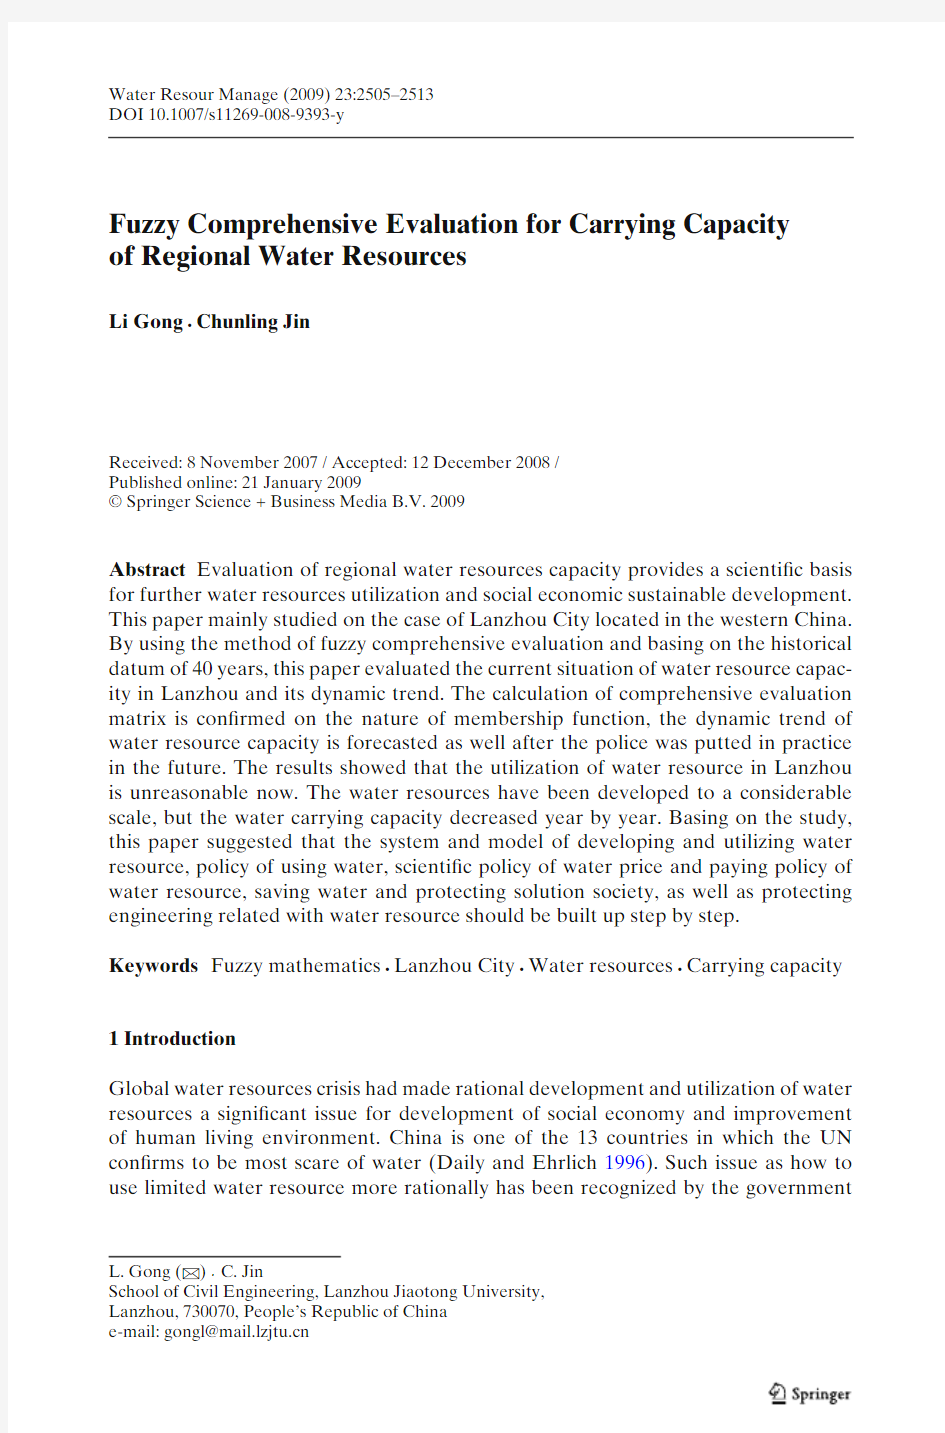 Fuzzy comprehensive evaluation for carrying capacity of regional water resources